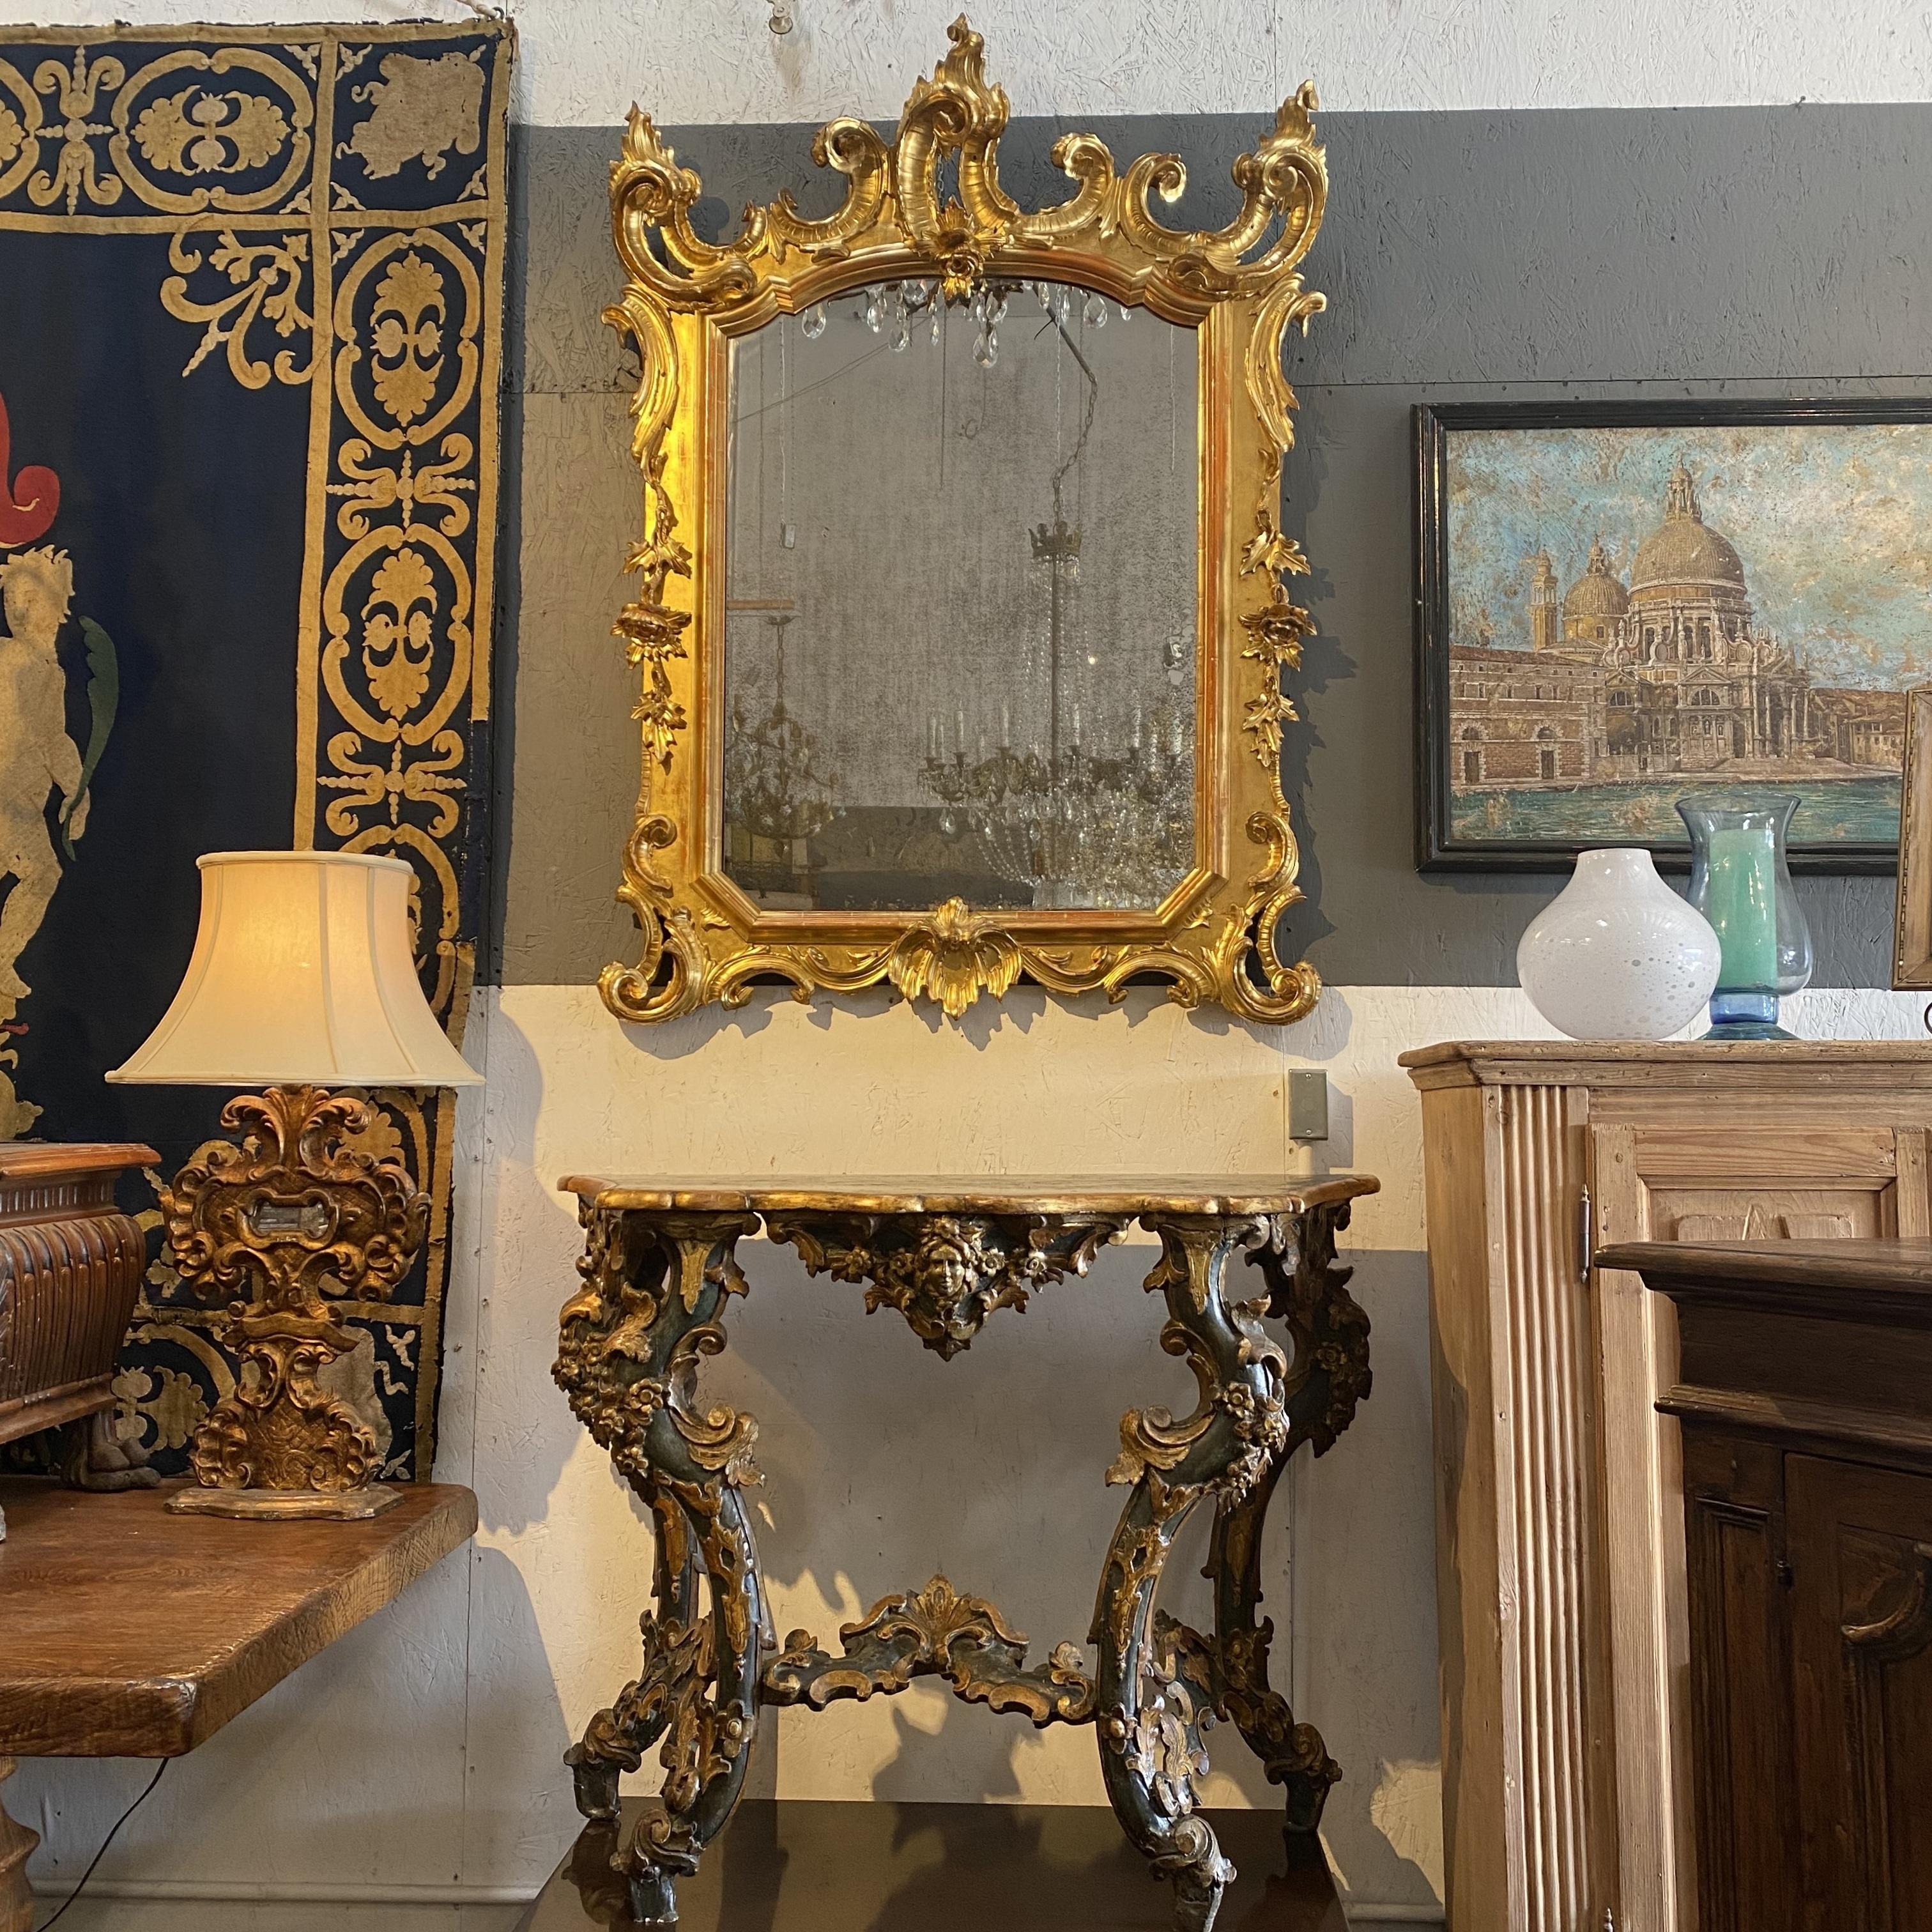 Spectacular Italian Baroque style mirror frame, beautifully carved and gilded wood with plant volutes, flowers and leaves, and crowning peaks. Glamorous blend of grande & delightful details, certain to please every glance. Lombardo Veneto era, circa